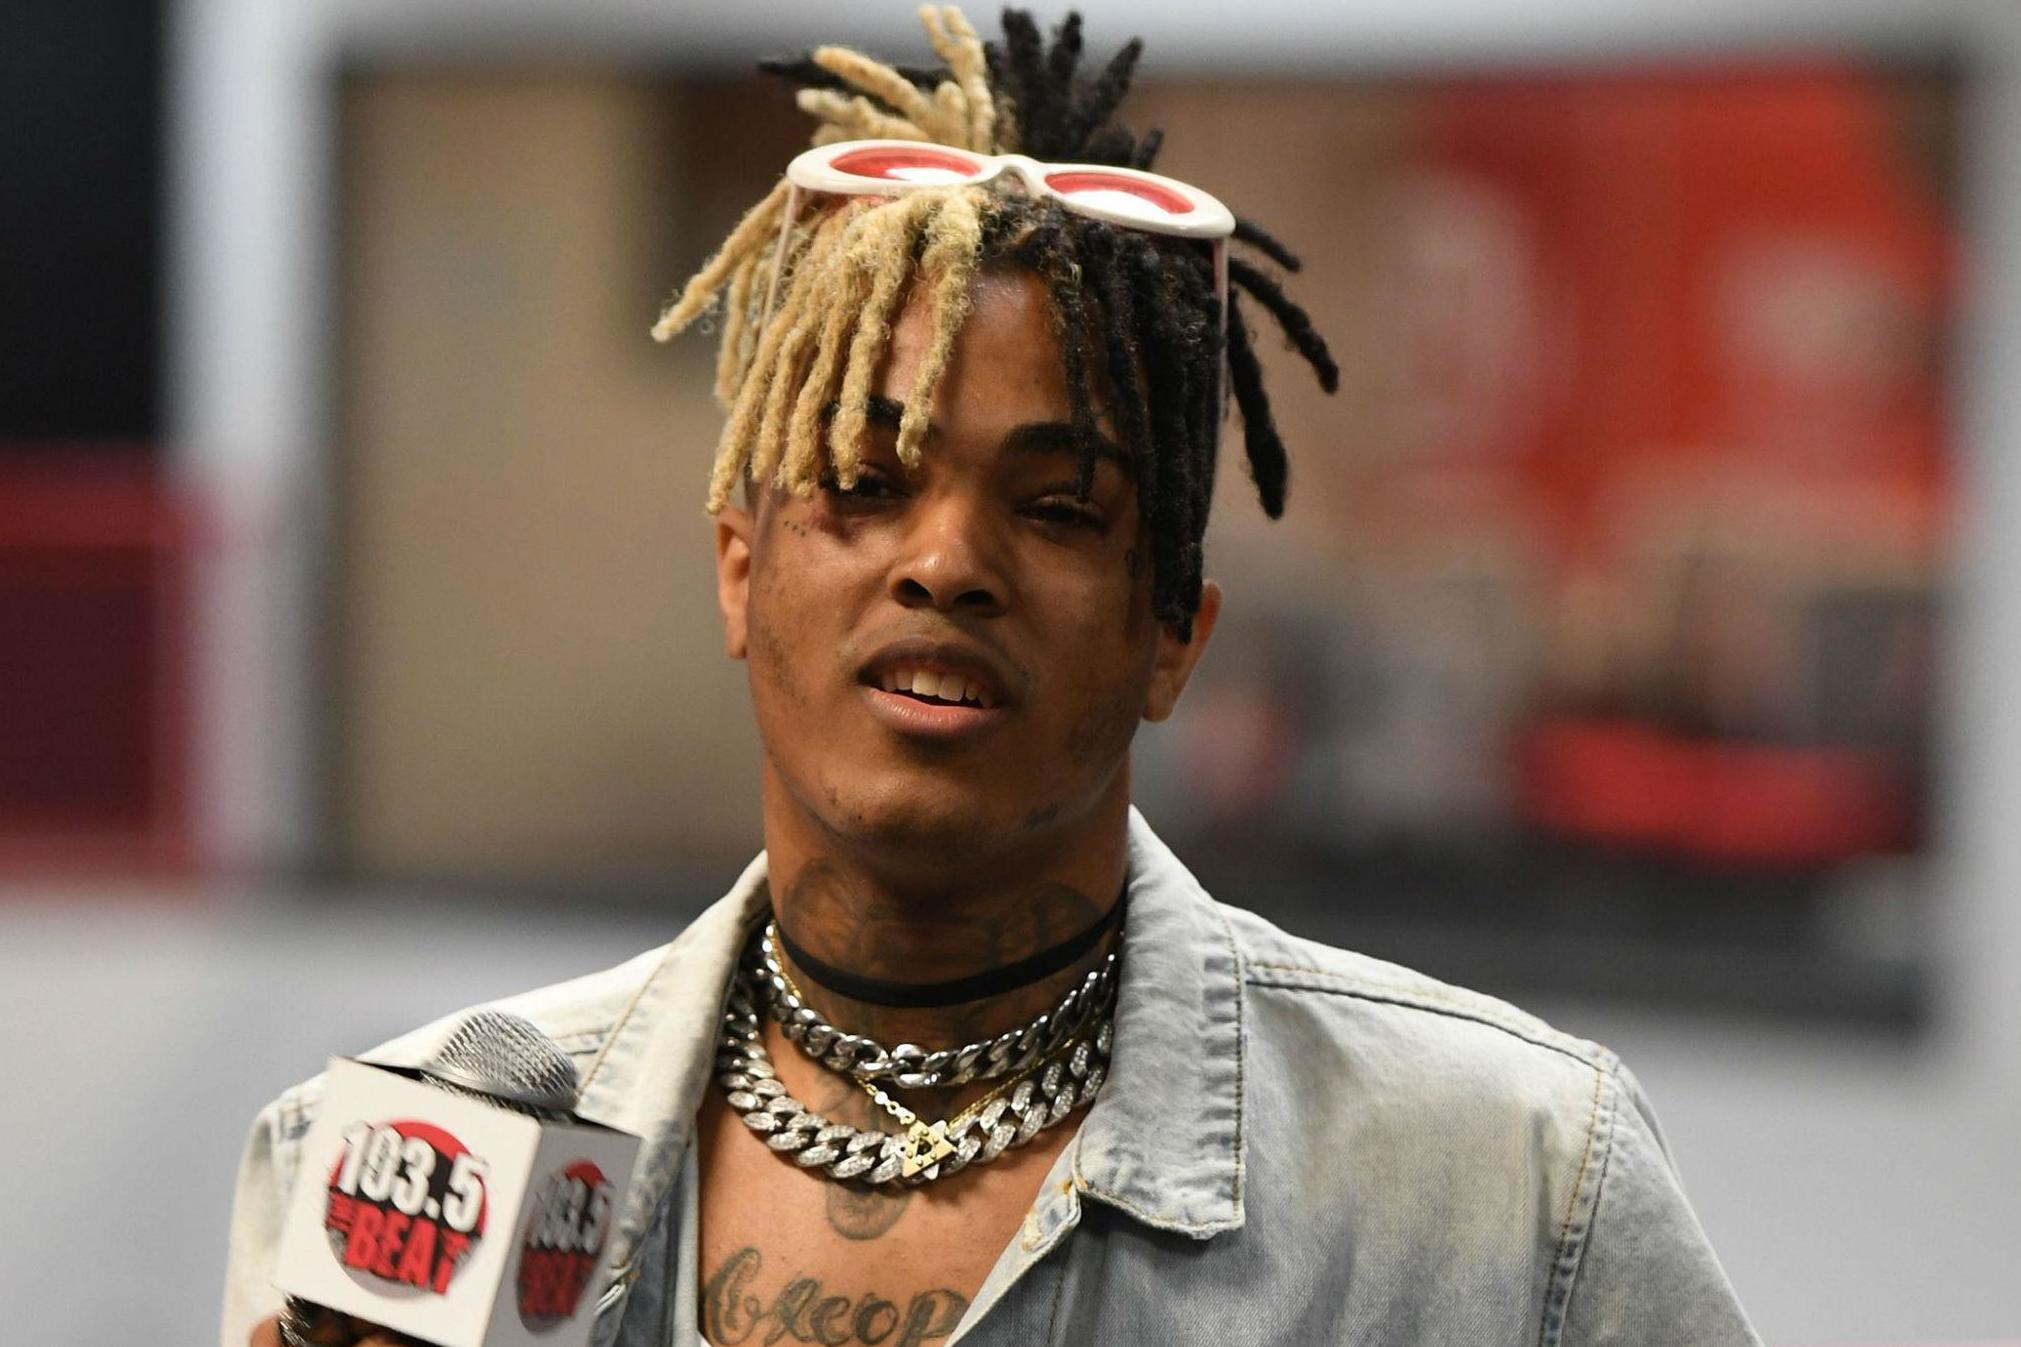 XXXTentacion death: Rapper attends his own funeral in new